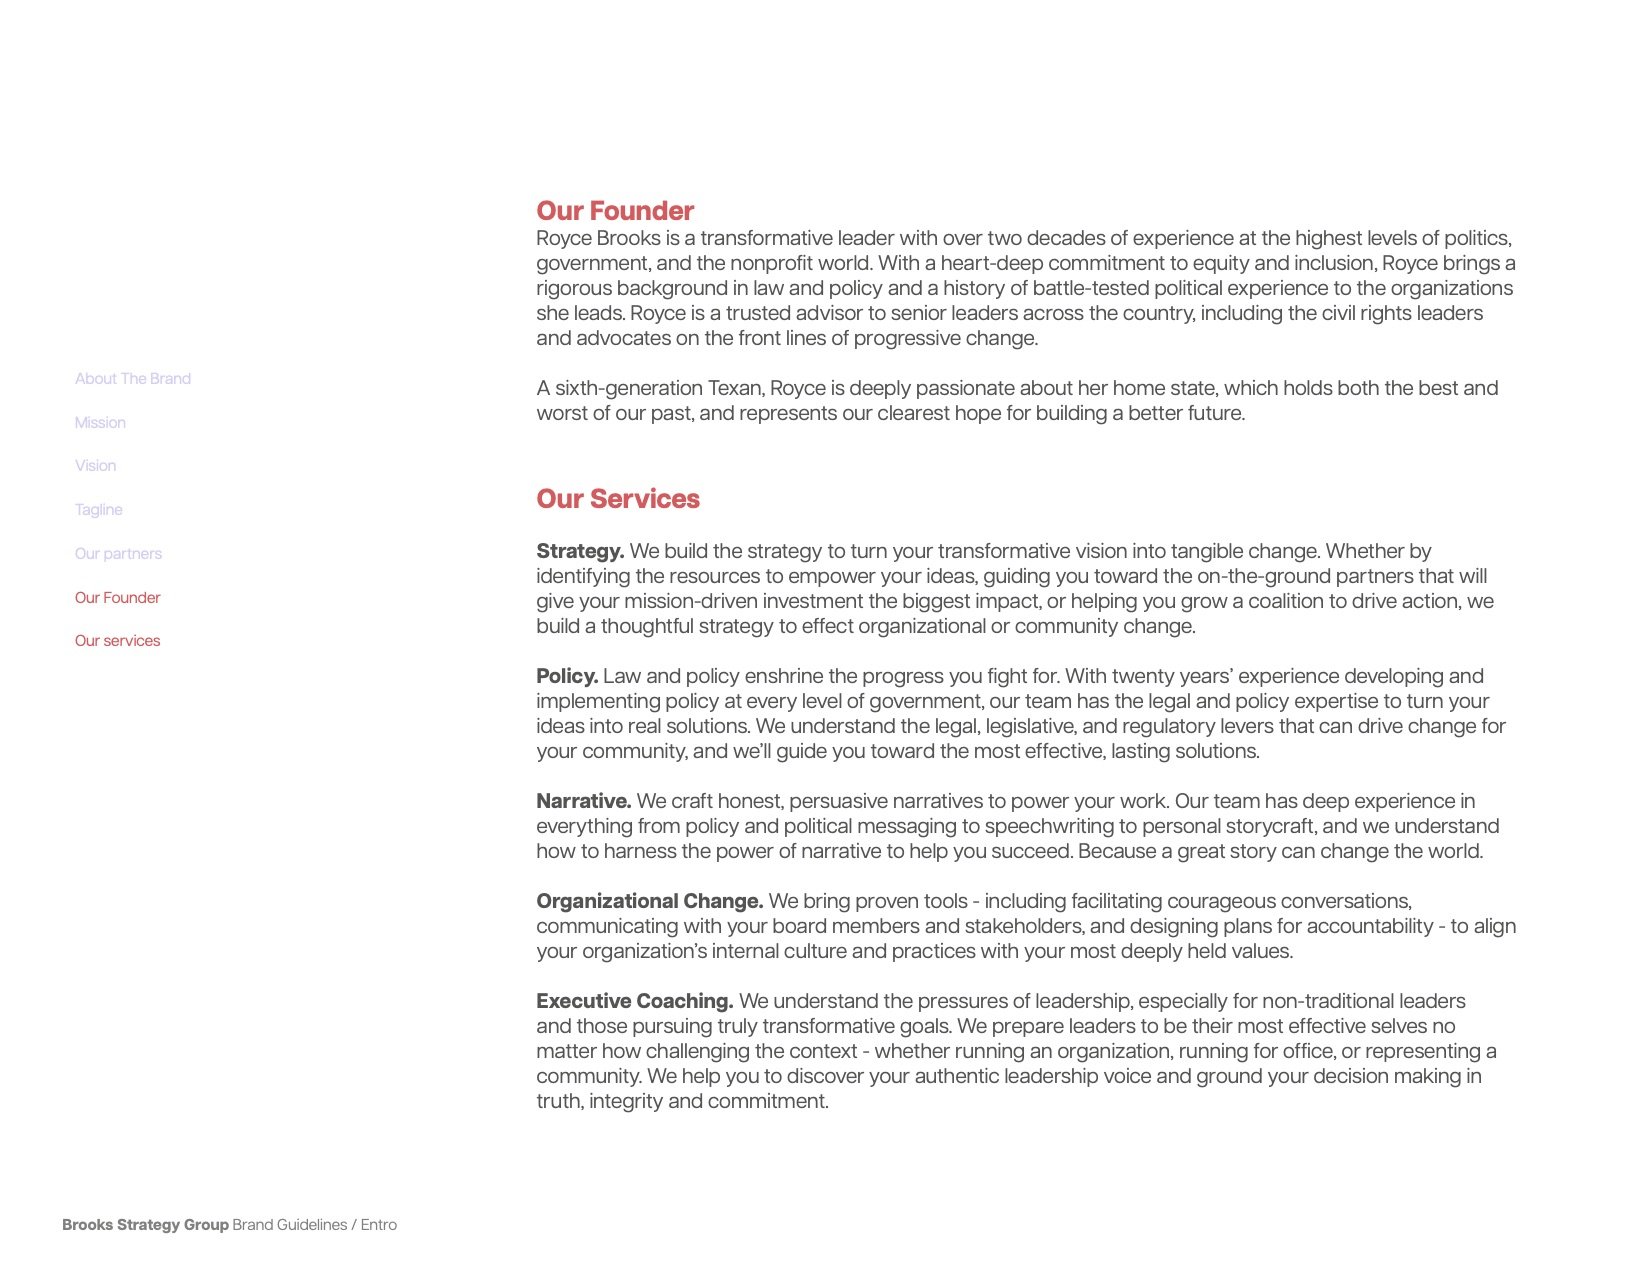 Brooks-brand-guidelines-Final Review page 3.jpg